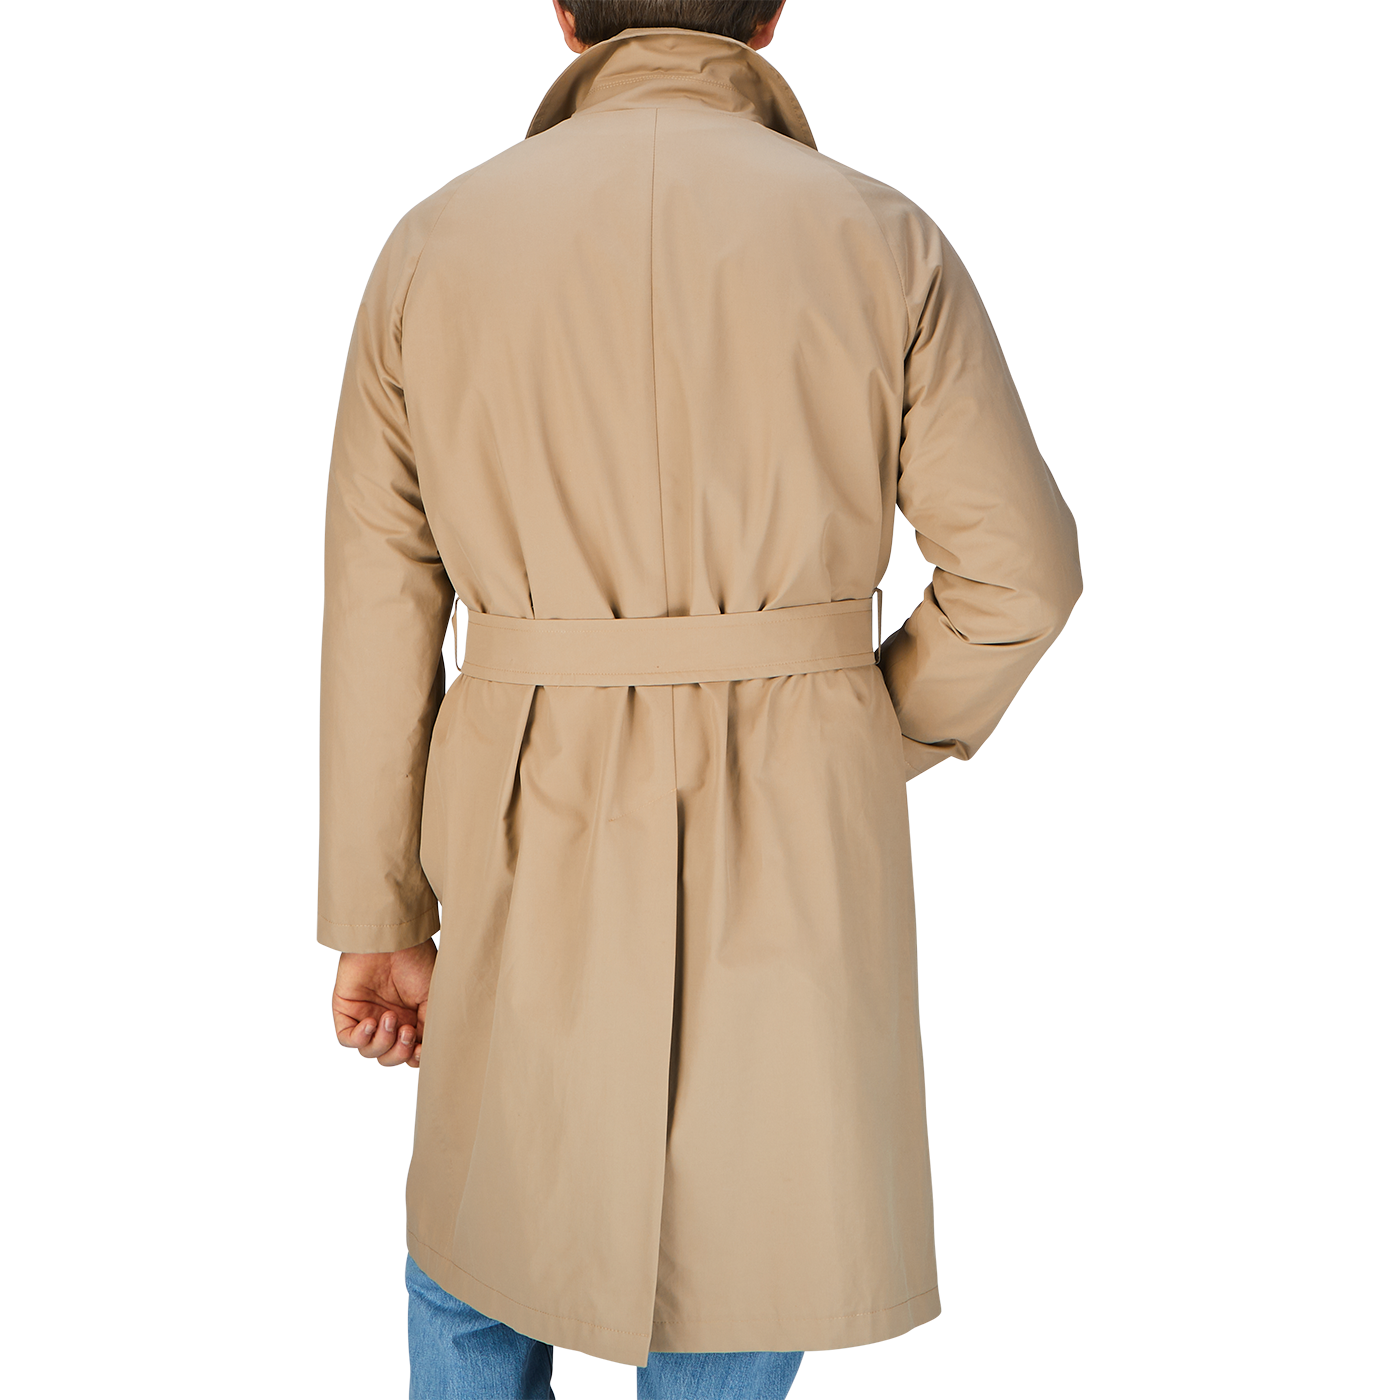 A man in a water-resistant Tagliatore khaki beige cotton nylon trench coat, seen from behind.